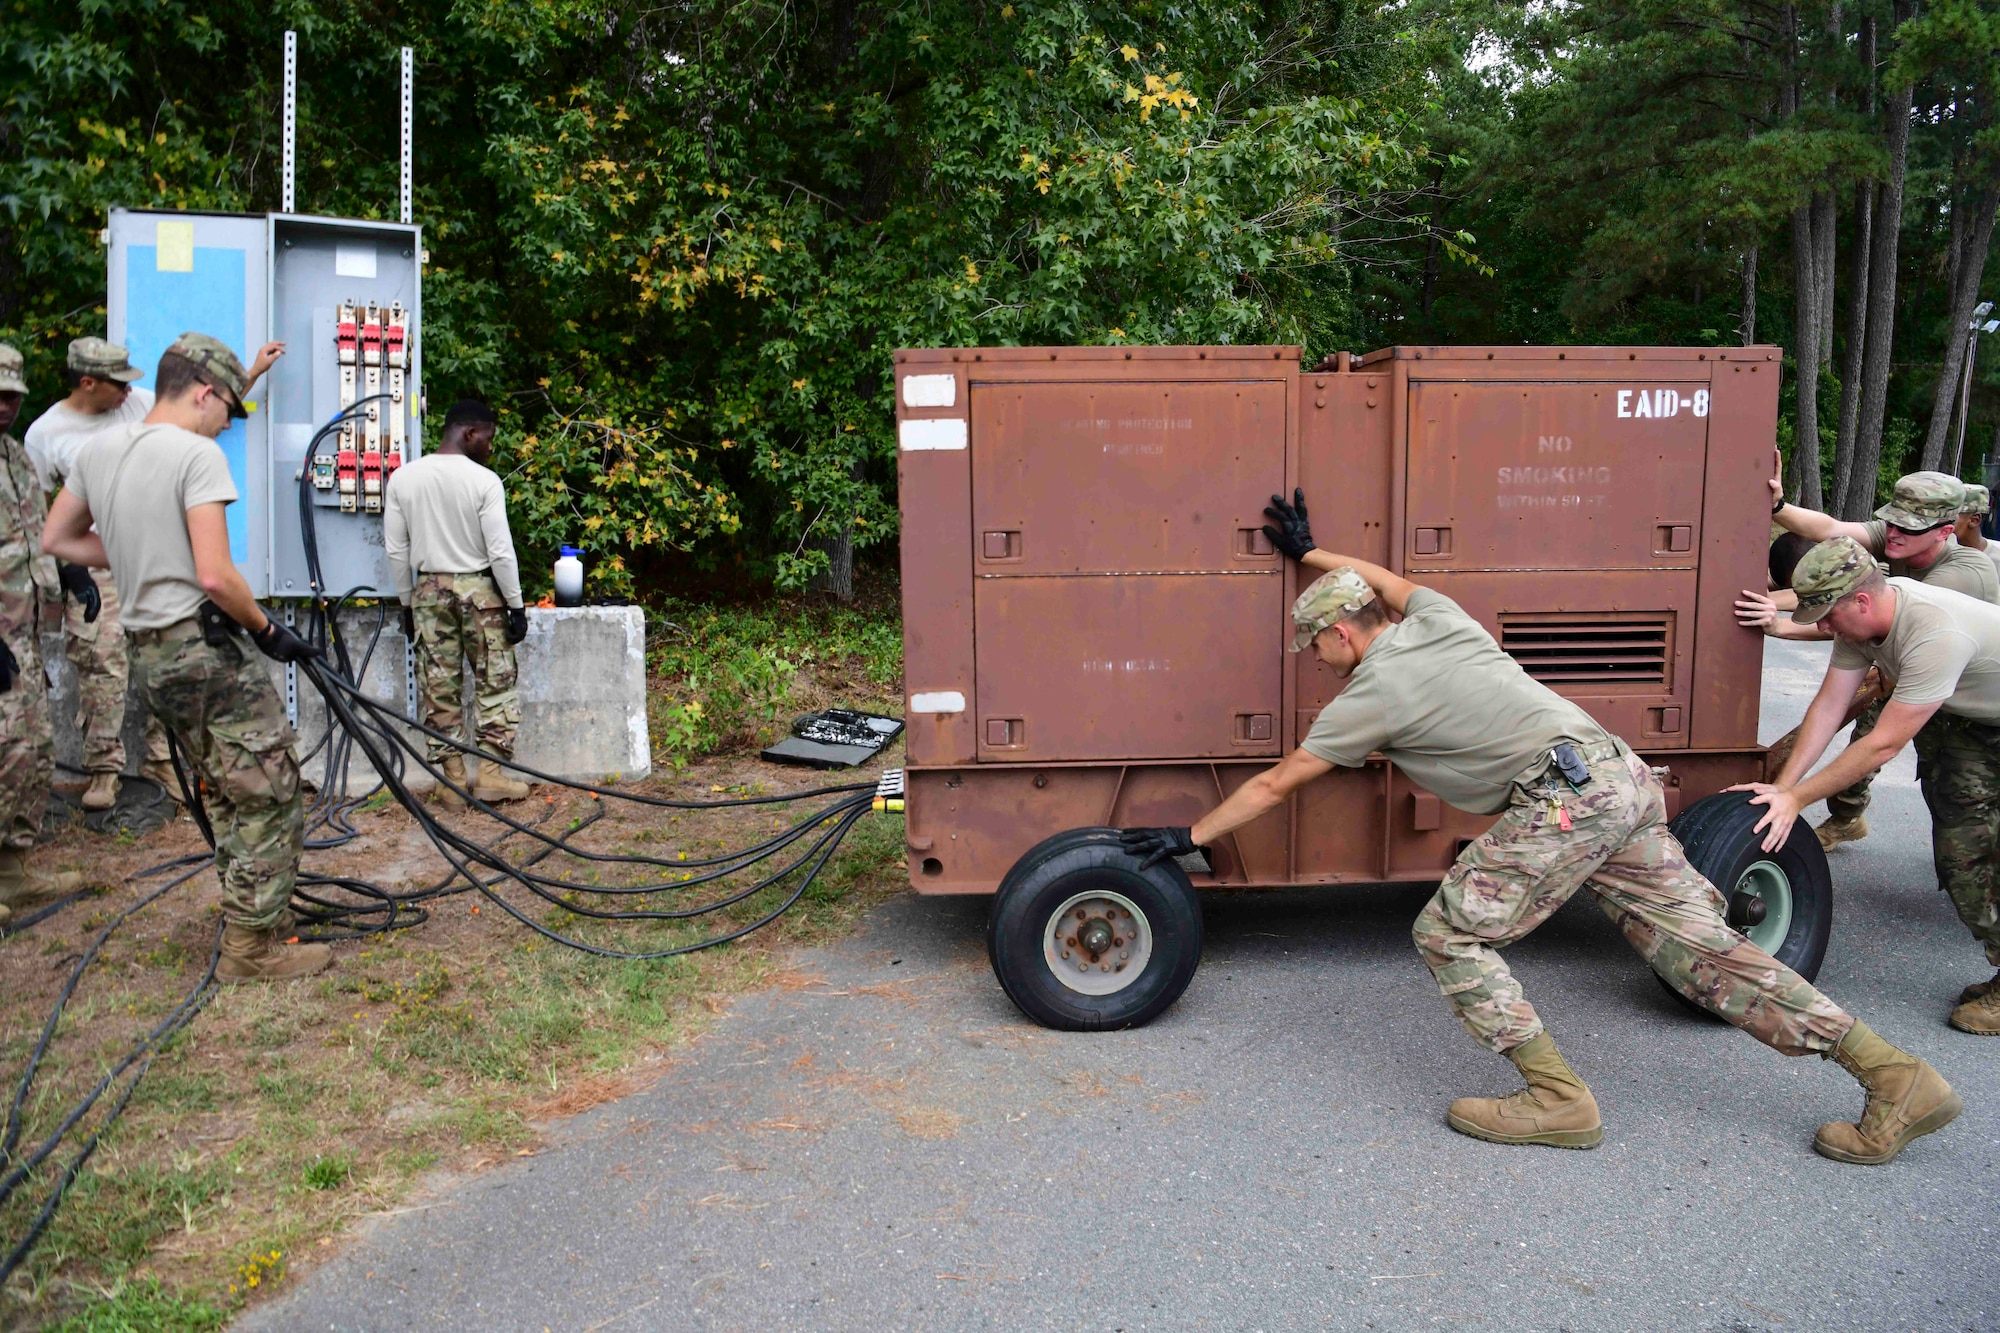 Airmen from the 4th Electrical Engineer Squadron and 567th Red Horse Squadron set up a generator for the military working dog kennels before Hurricane Dorian, Sept. 4, 2019, at Seymour Johnson Air Force Base, North Carolina. The 4th CES, to include equipment operators, electricians, plumbers, structural craftsman, heating, ventilation and air conditioning, and production technicians, are providing 24-hour response and recovery operations during and following Hurricane Dorian. (U.S. Air Force photo by Senior Airman Boyton)